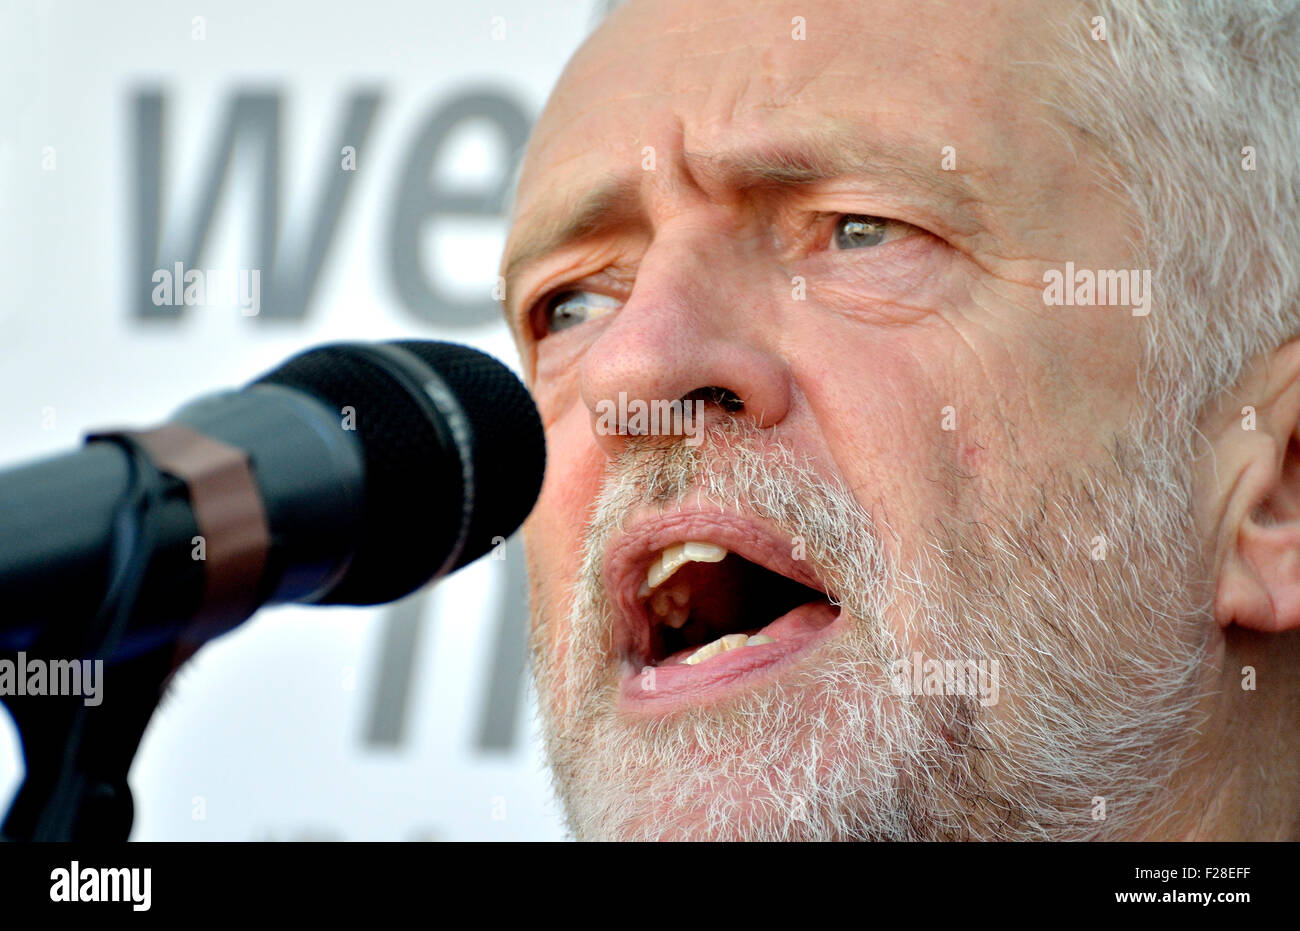 Jeremy Corbyn MP speaking at the 'Refugees Welcome Here' rally in Parliament Square,12/09/15, his first engagement as leader Stock Photo